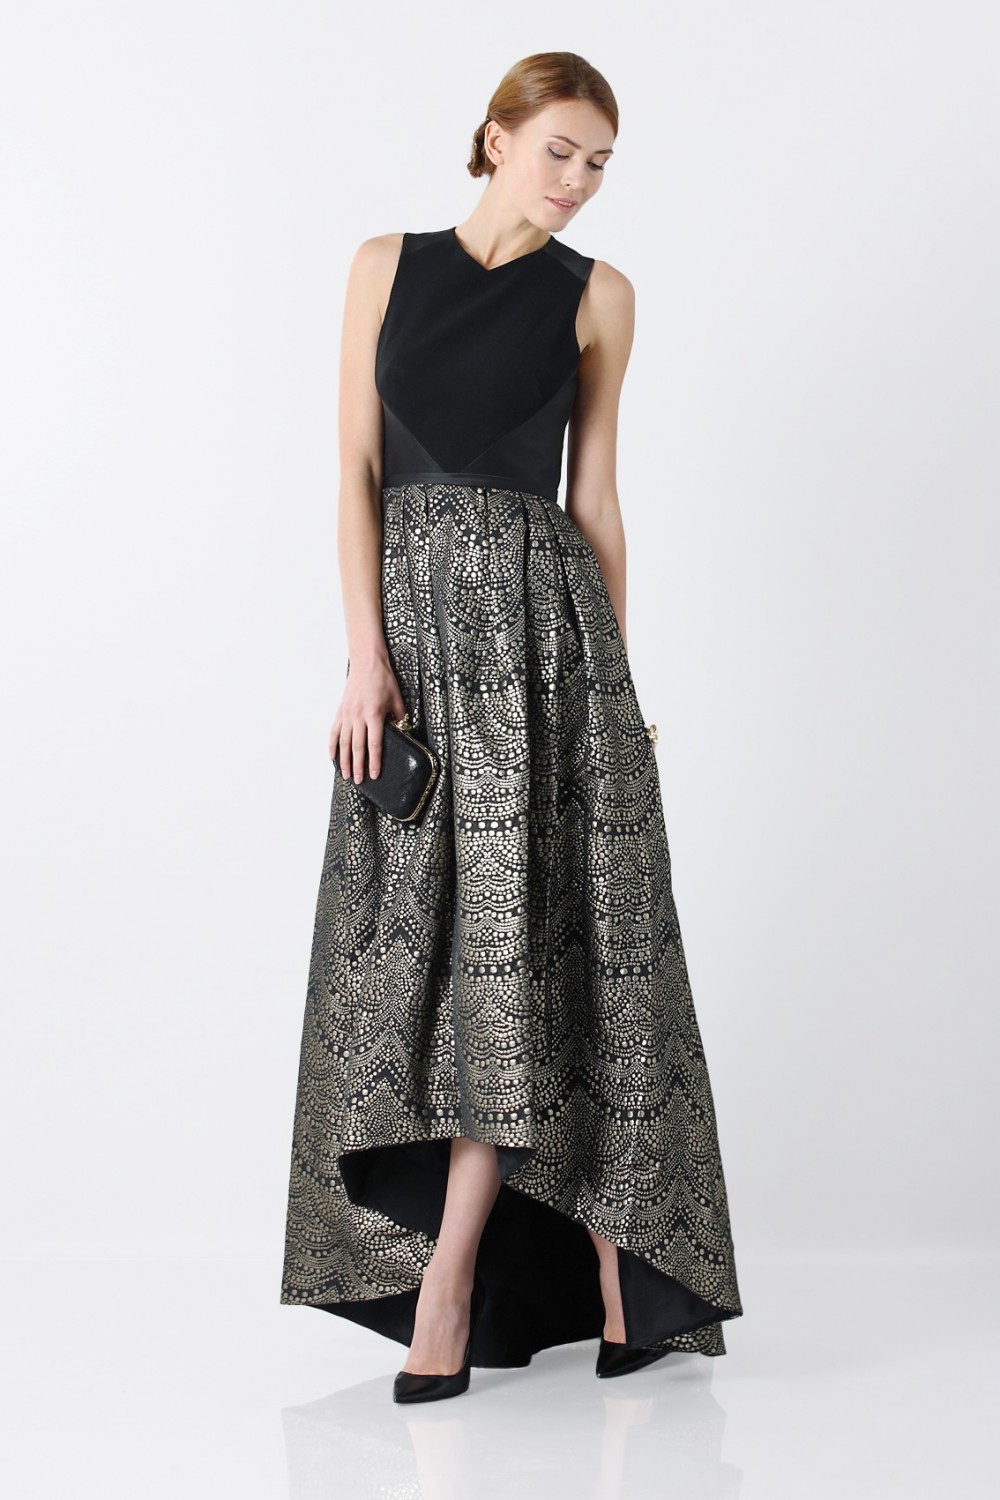 Dress with patterned gold skirt 